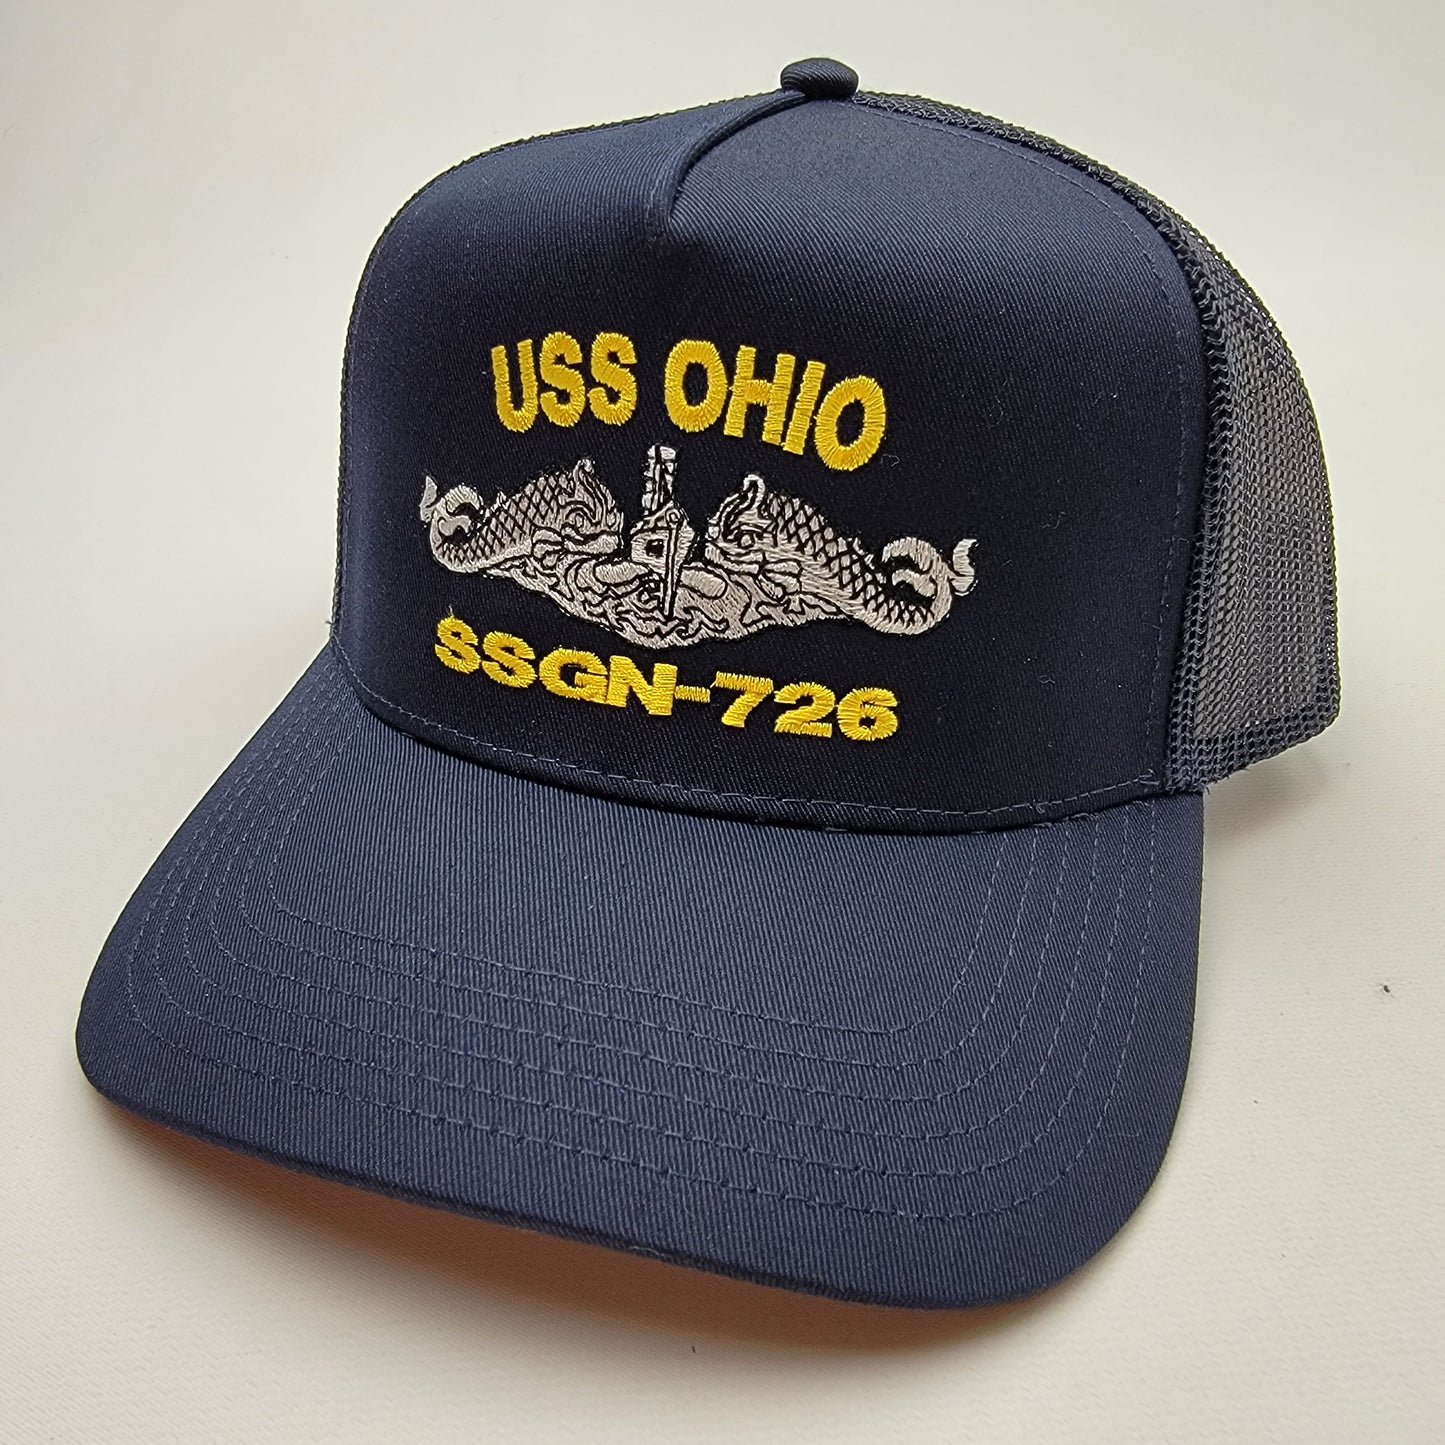 US NAVY USS OHIO SSGN-726 Embroidered Hat Baseball Cap Adjustable Blue